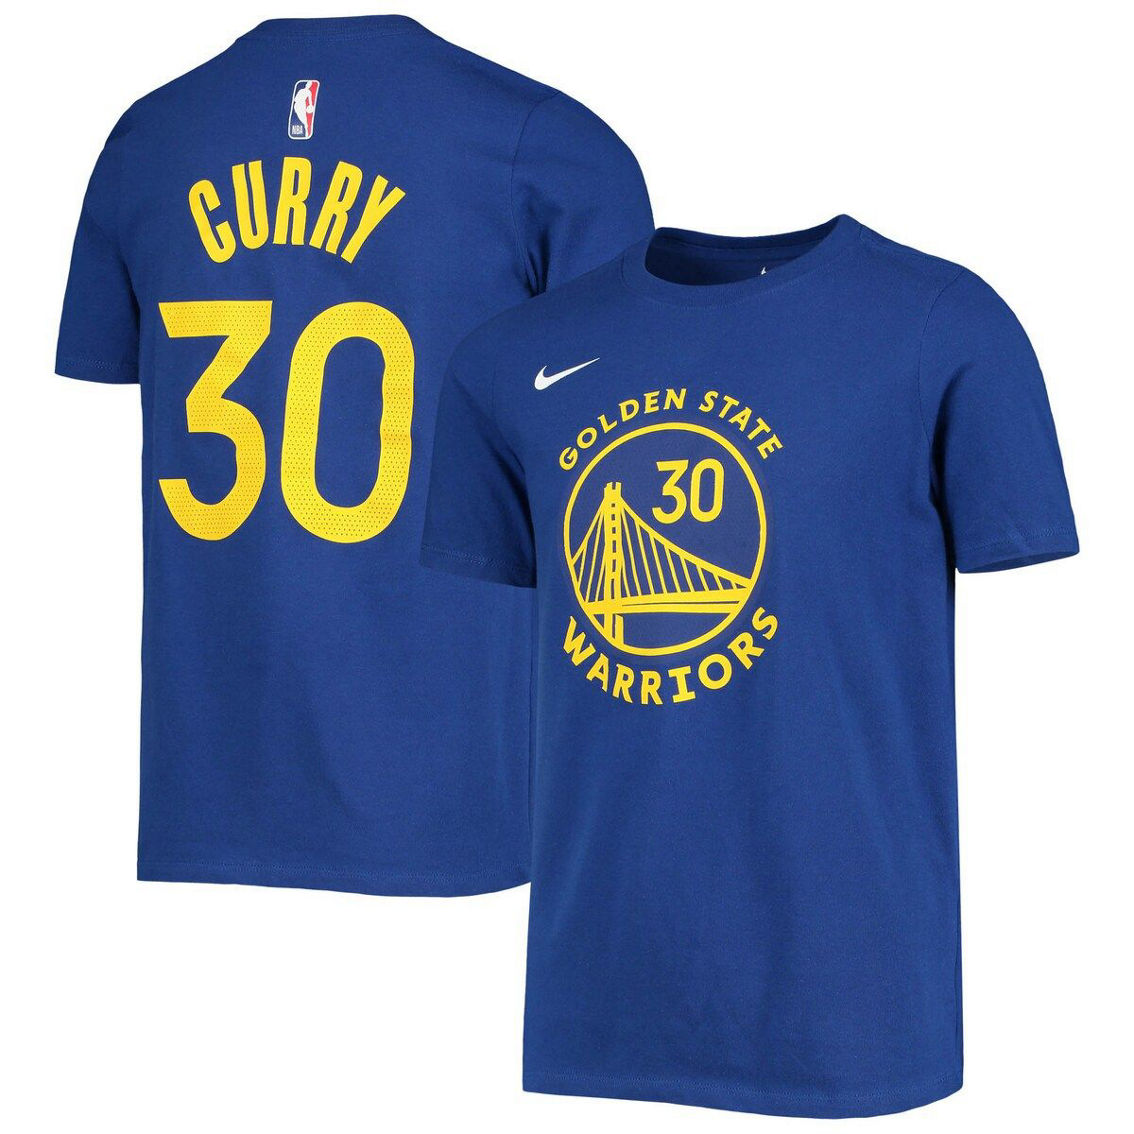 Nike Youth Stephen Curry Royal Golden State Warriors Logo Name & Number Performance T-Shirt - Image 2 of 4